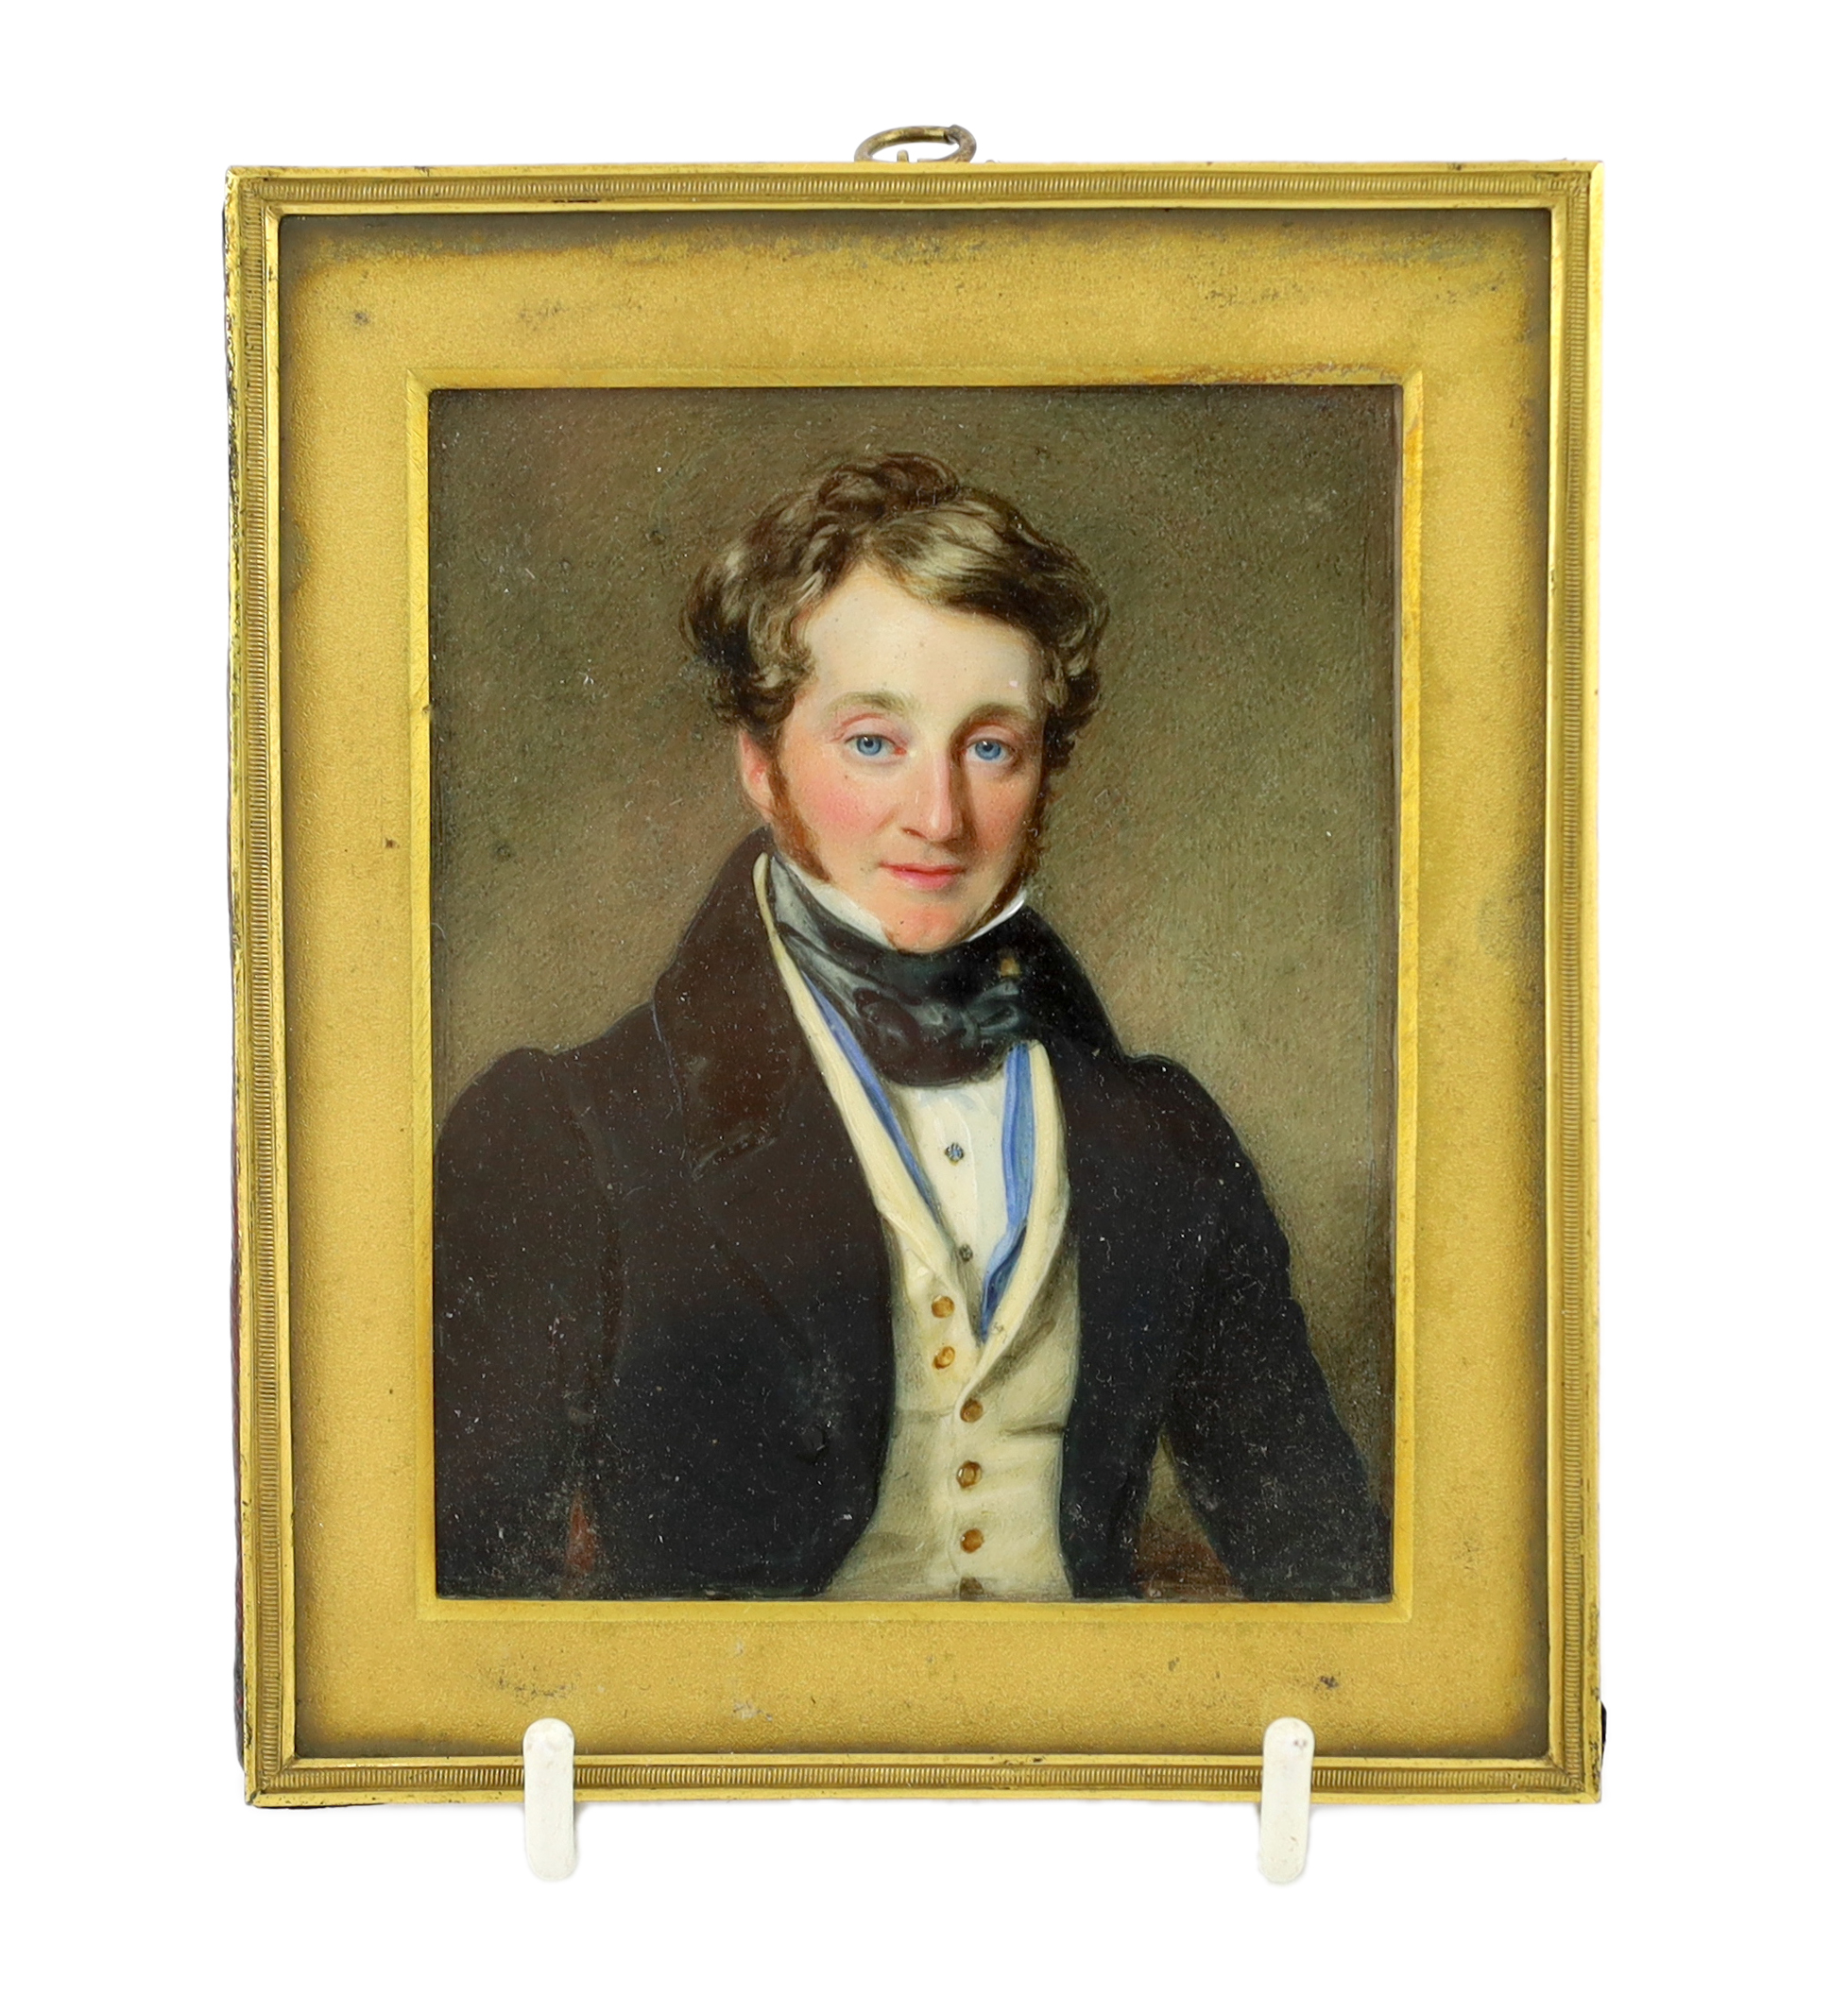 English School circa 1830, Portrait miniature of George Robert Smith (1793-1869), watercolour on ivory, 8.8 x 7cm. CITES Submission reference Y27J3P8N